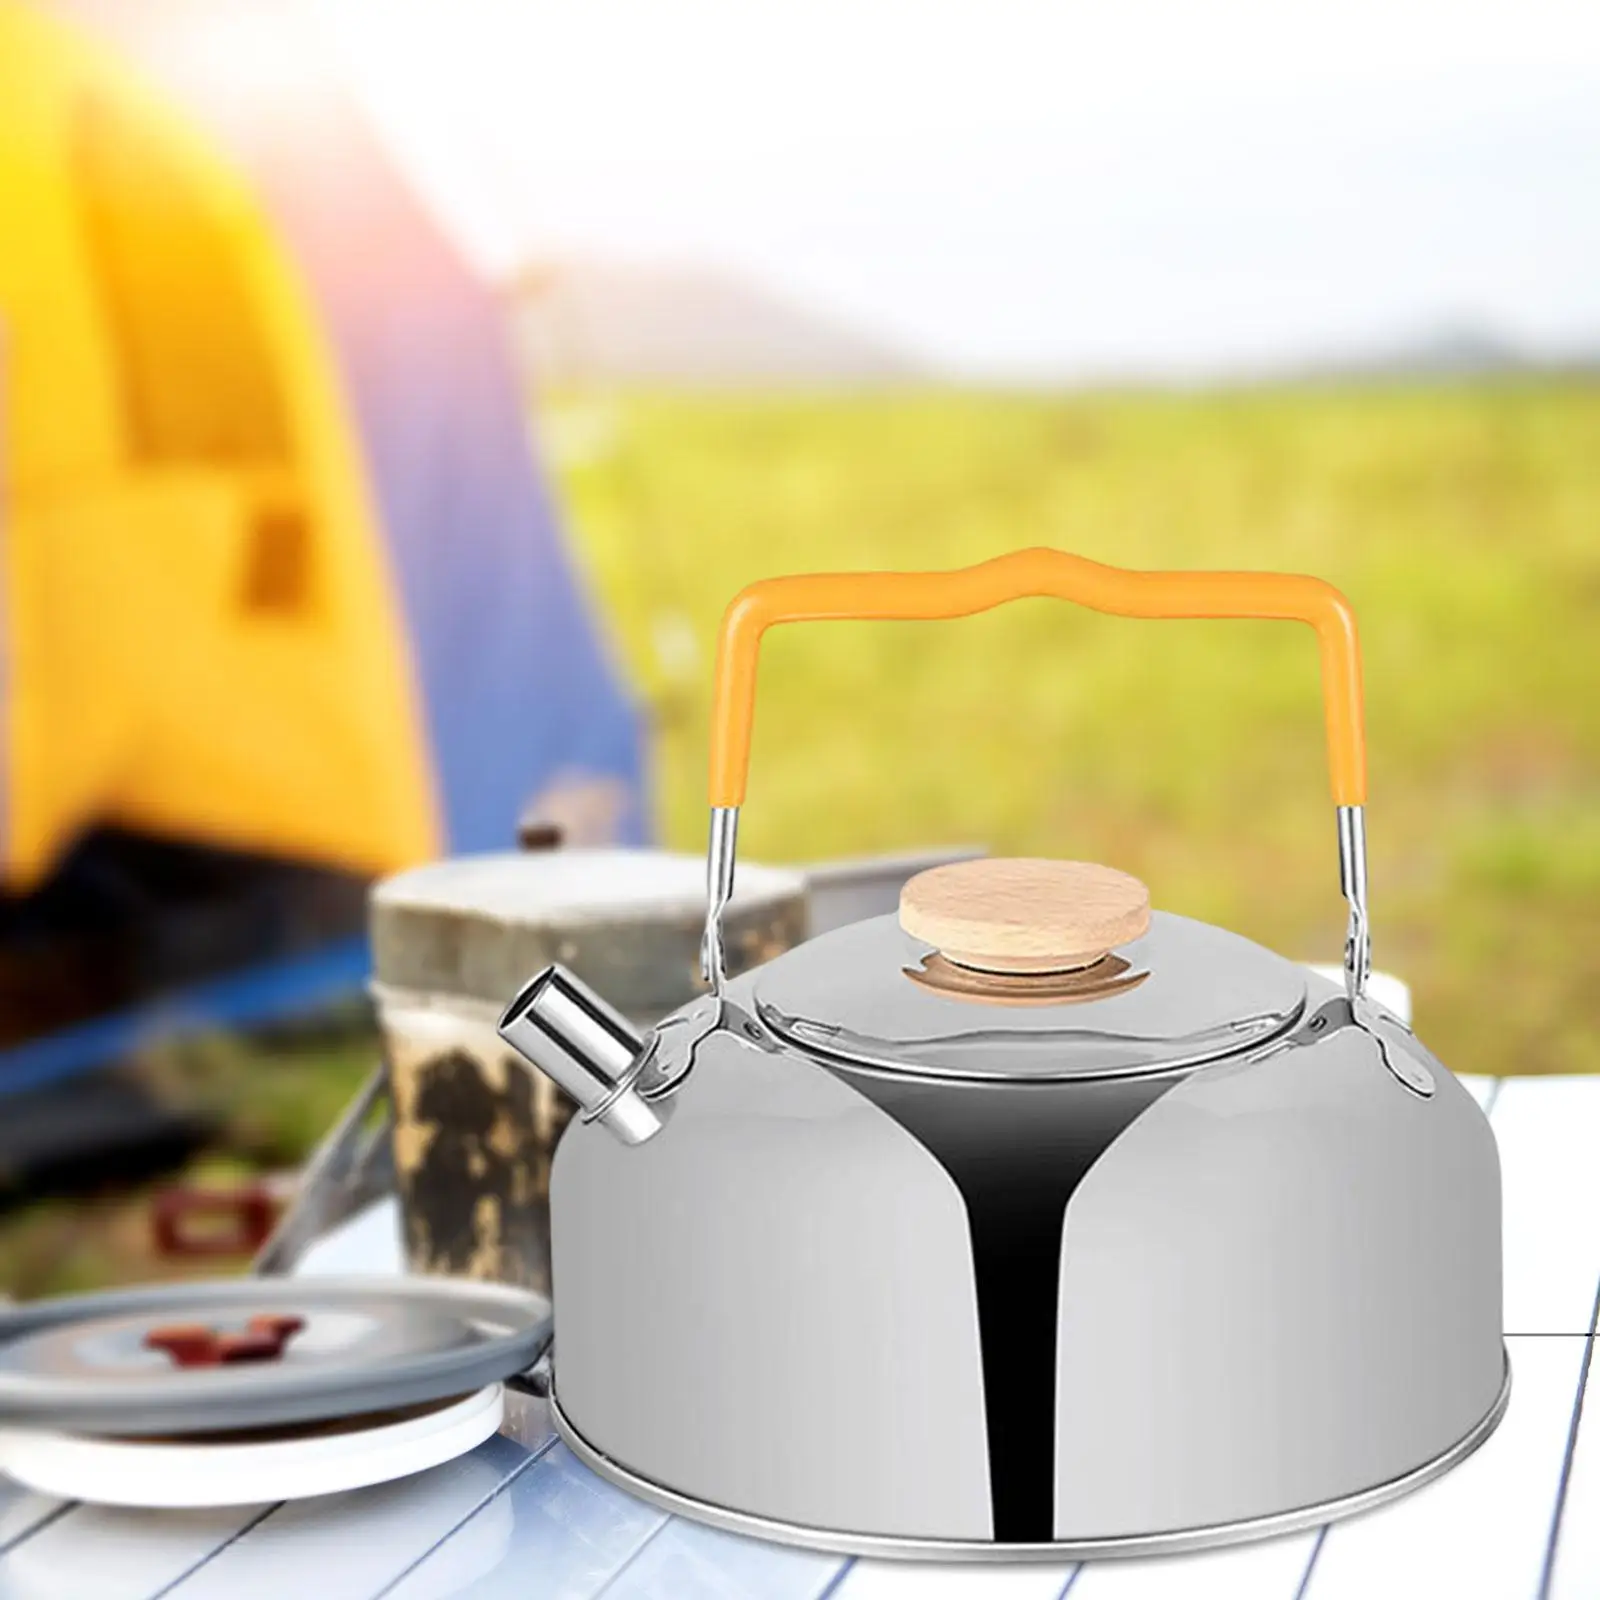 Water Boiler Teapot Coffee Pot Teakettle 1L Camping Water Kettle Lightweight for Campfire Cooking Kitchen Travel Hiking